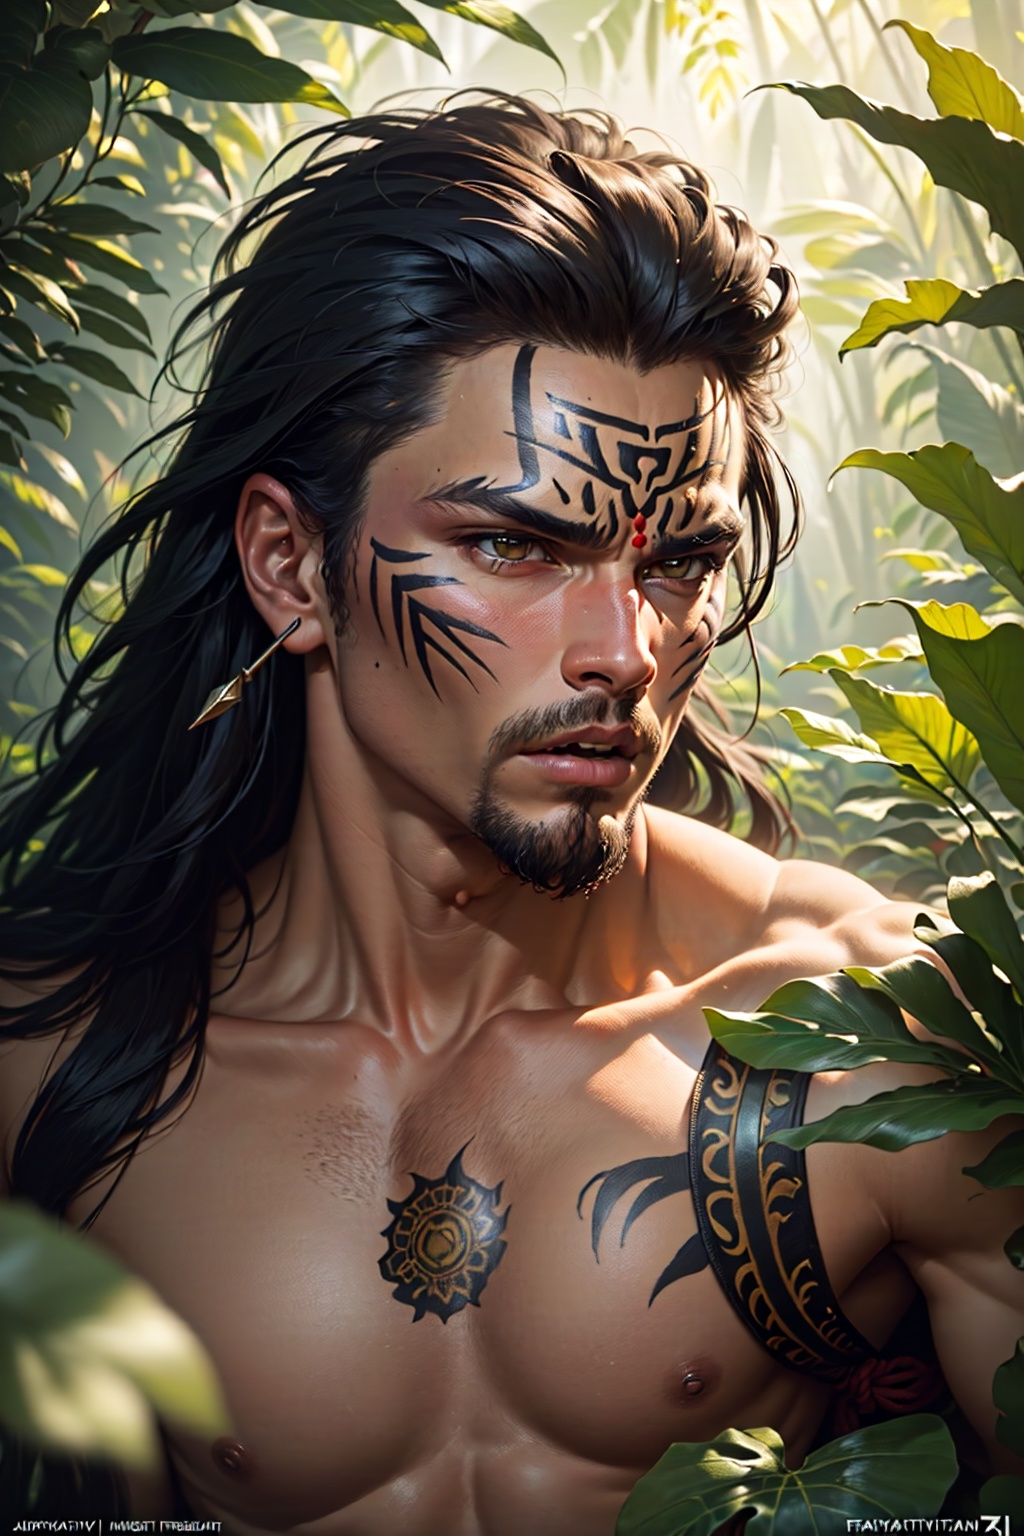 ((best quality)), ((masterpiece)), (detailed), (realistic), male warrior, muscular physique, tribal attire, face paint, wielding spear, (jungle:1.3), dense foliage, exotic plants, dappled sunlight, (hyperrealistic:1.2), oil painting, (Frank Frazetta:1.1), DeviantArt influence, dynamic action pose, (intense expression:1.2), (portrait shot:1.1), 8k resolution